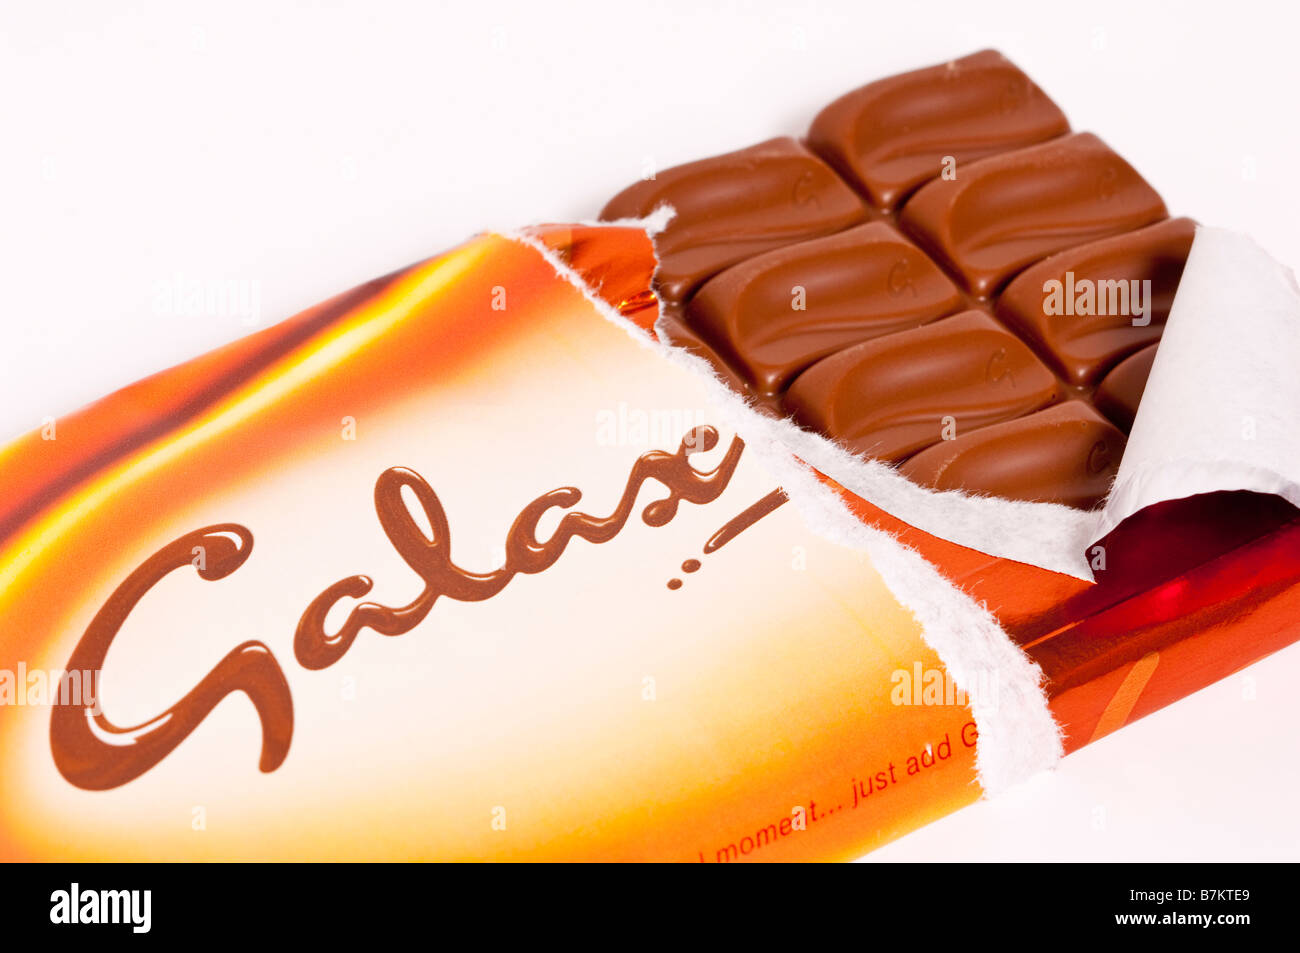 A close up of a bar of Galaxy milk chocolate with wrapper opened on a white background Stock Photo